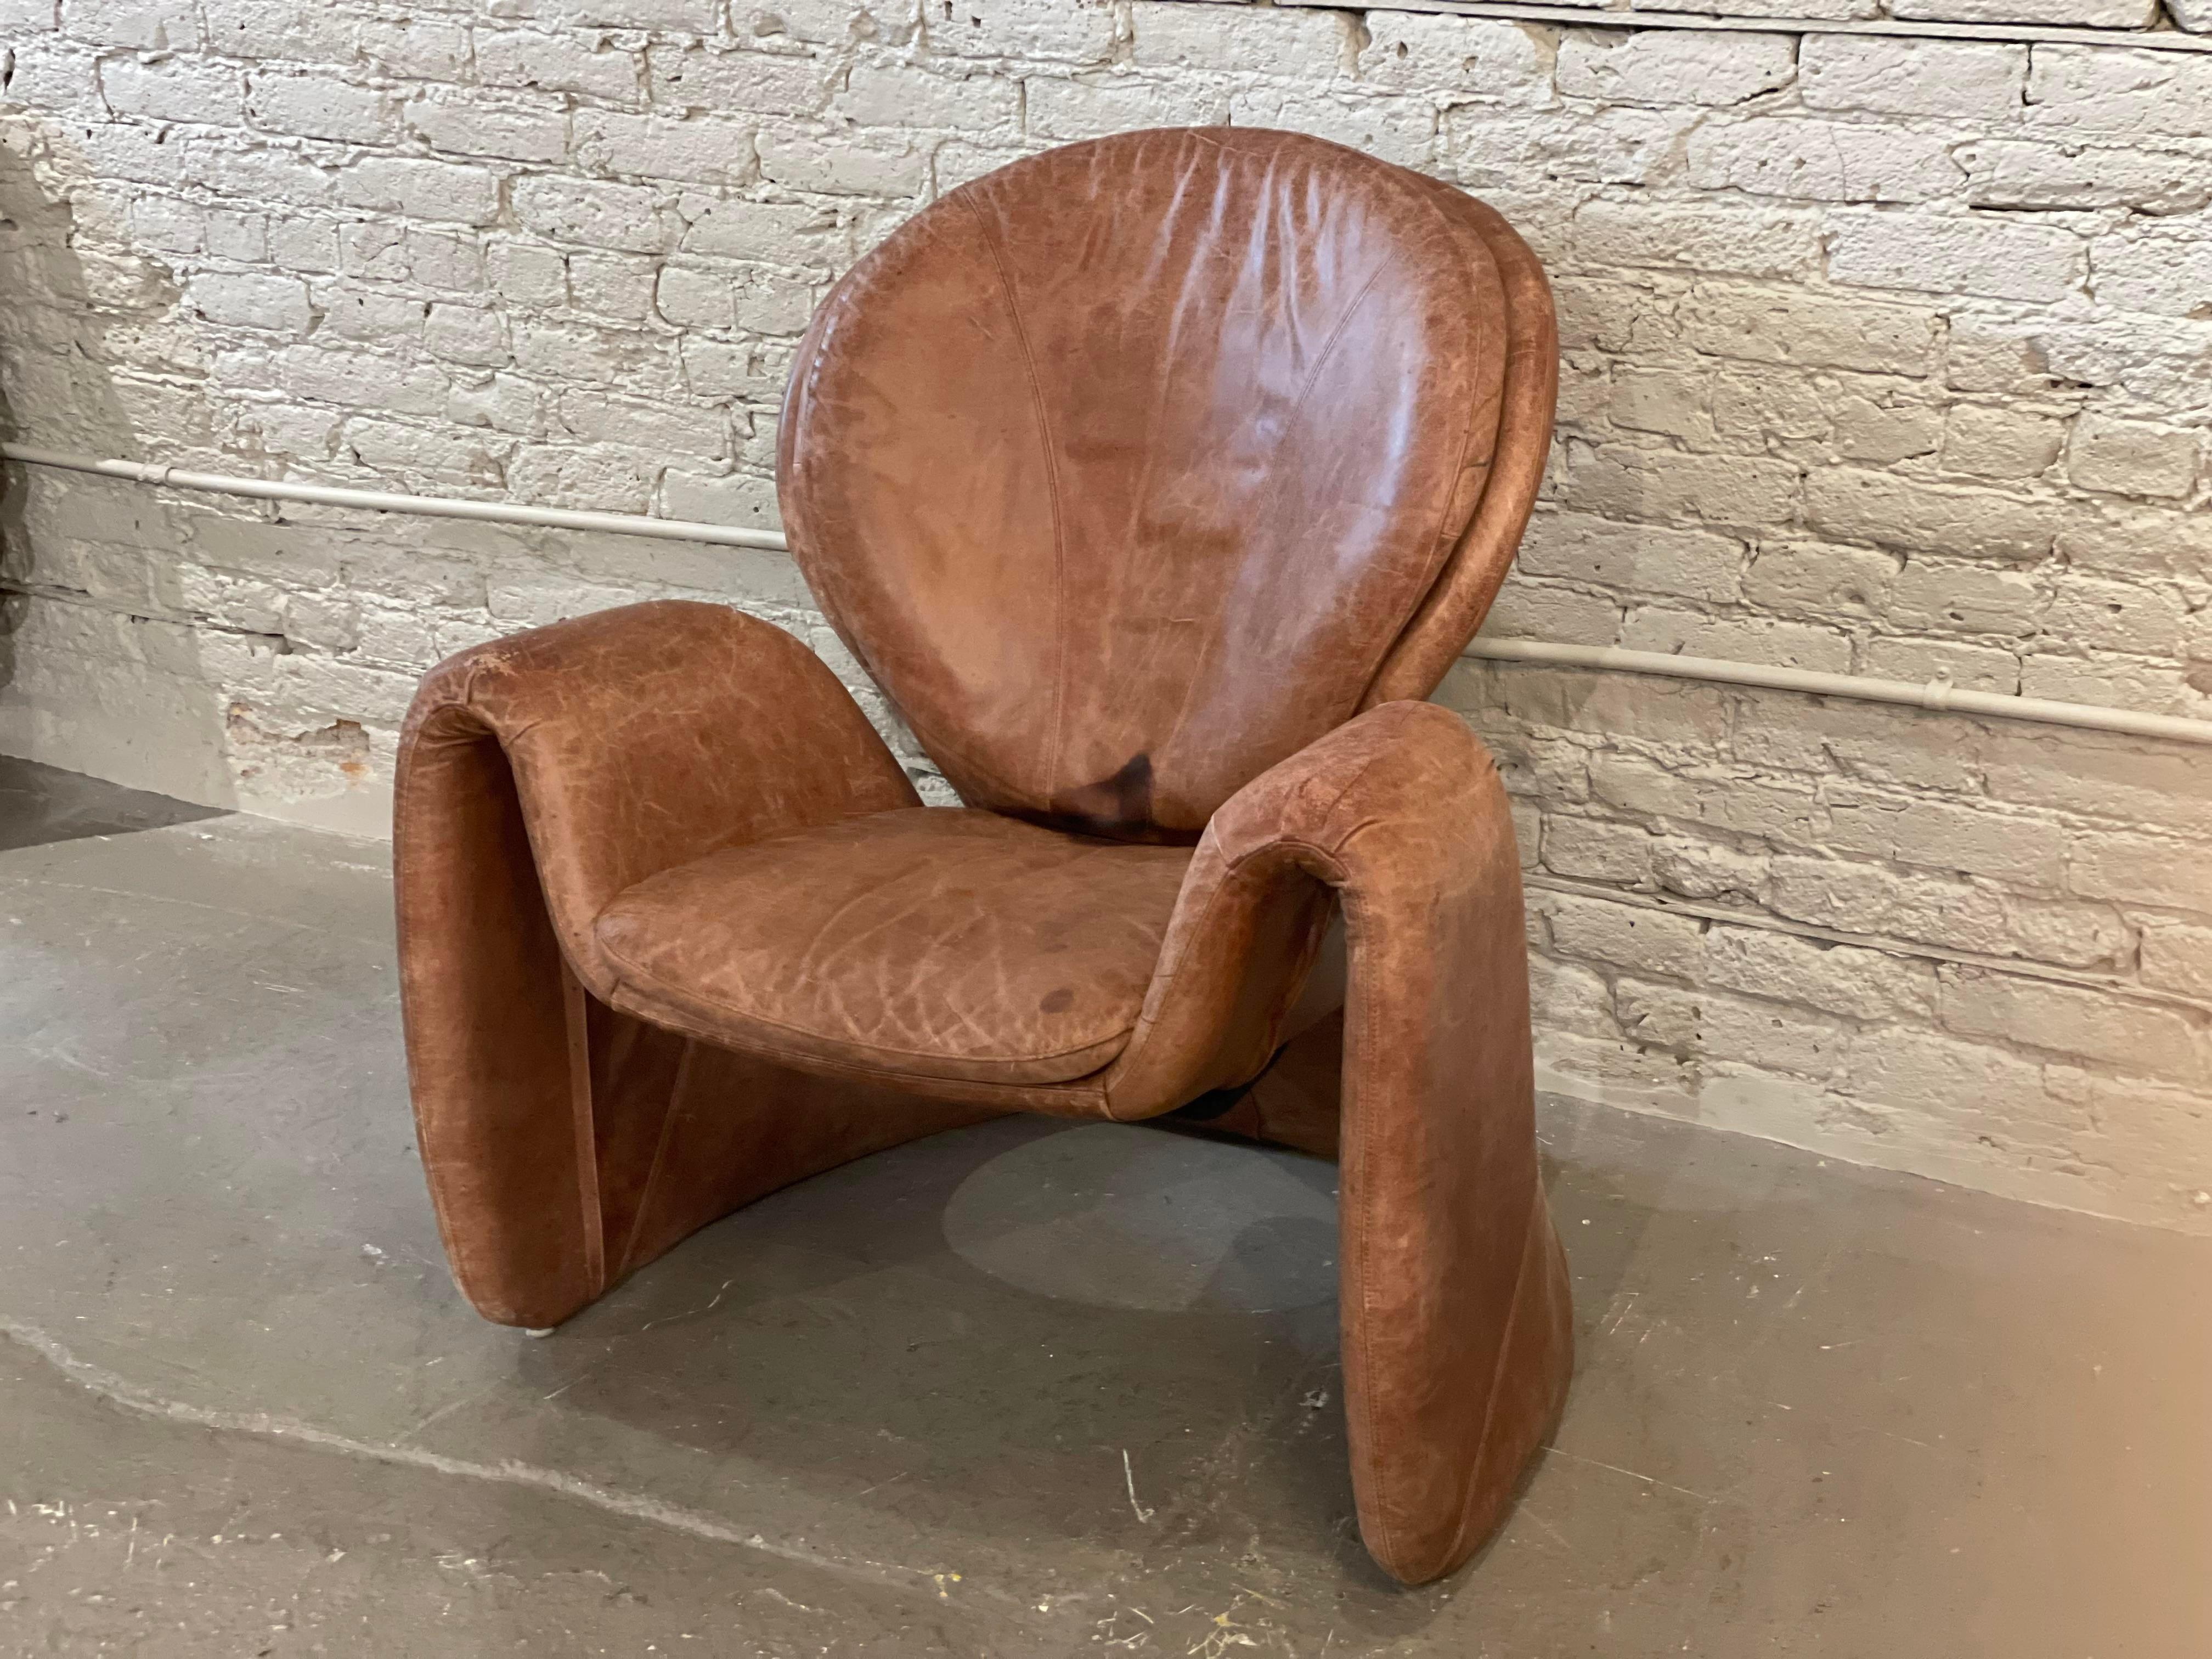 Stunning, sculptural, and comfortable. Still not sure if I want to sell this:)

No labels but in the style of Jaymar. The leather is gorgeous but has markings as shown. Perhaps a good cleaning?
  